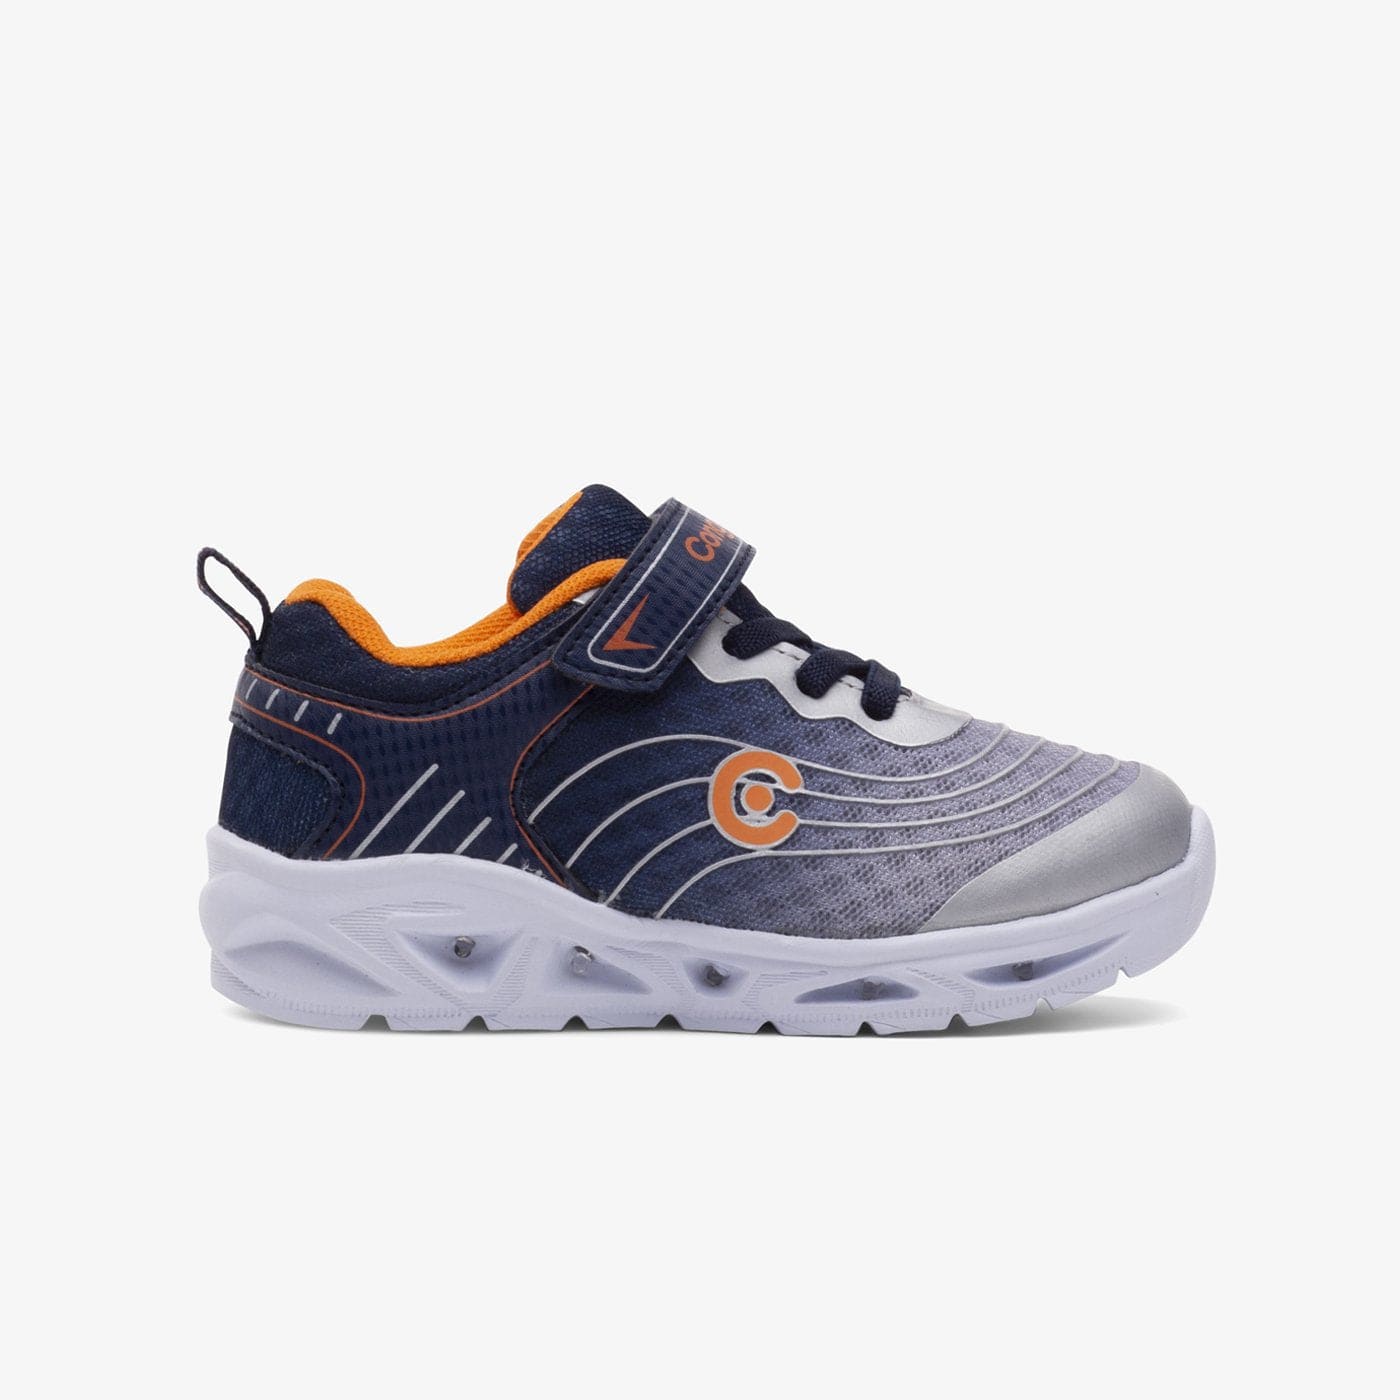 CONGUITOS Shoes Boy's Navy Orange Sneakers with Lights